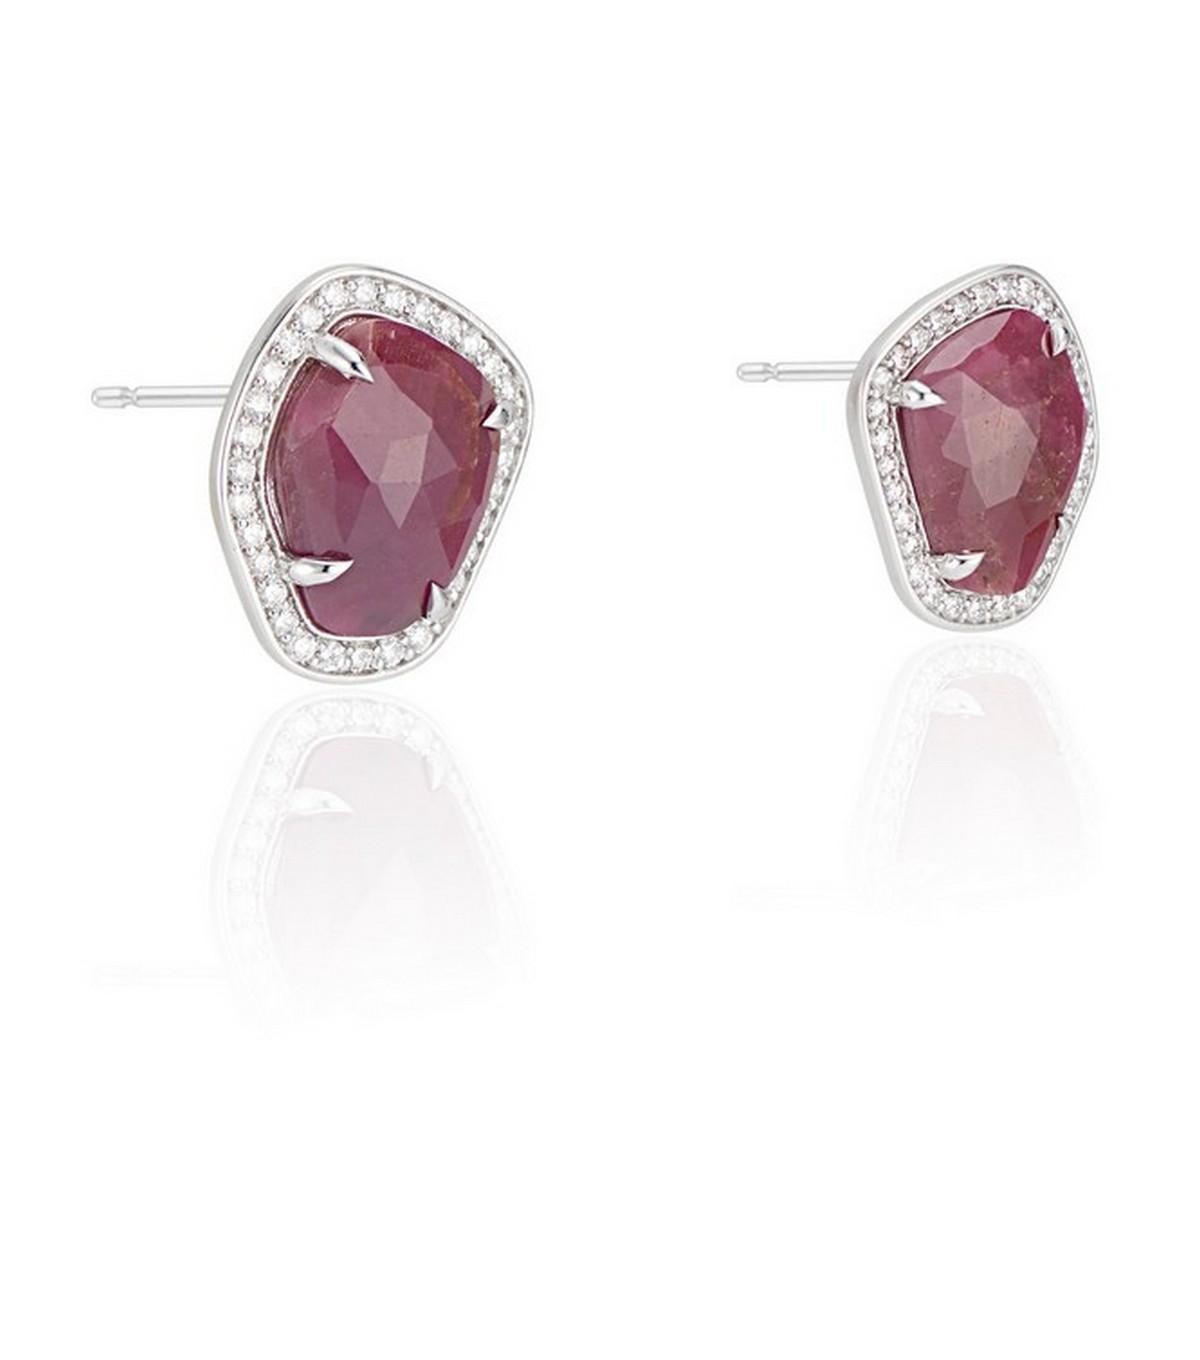 Our 18K White Gold Rich Red Ruby Slice Diamond Stud Earrings are the embodiment of understated luxury and eternal elegance.

These exquisite earrings blend luxurious materials with a classic design, creating a stunning accessory that transcends